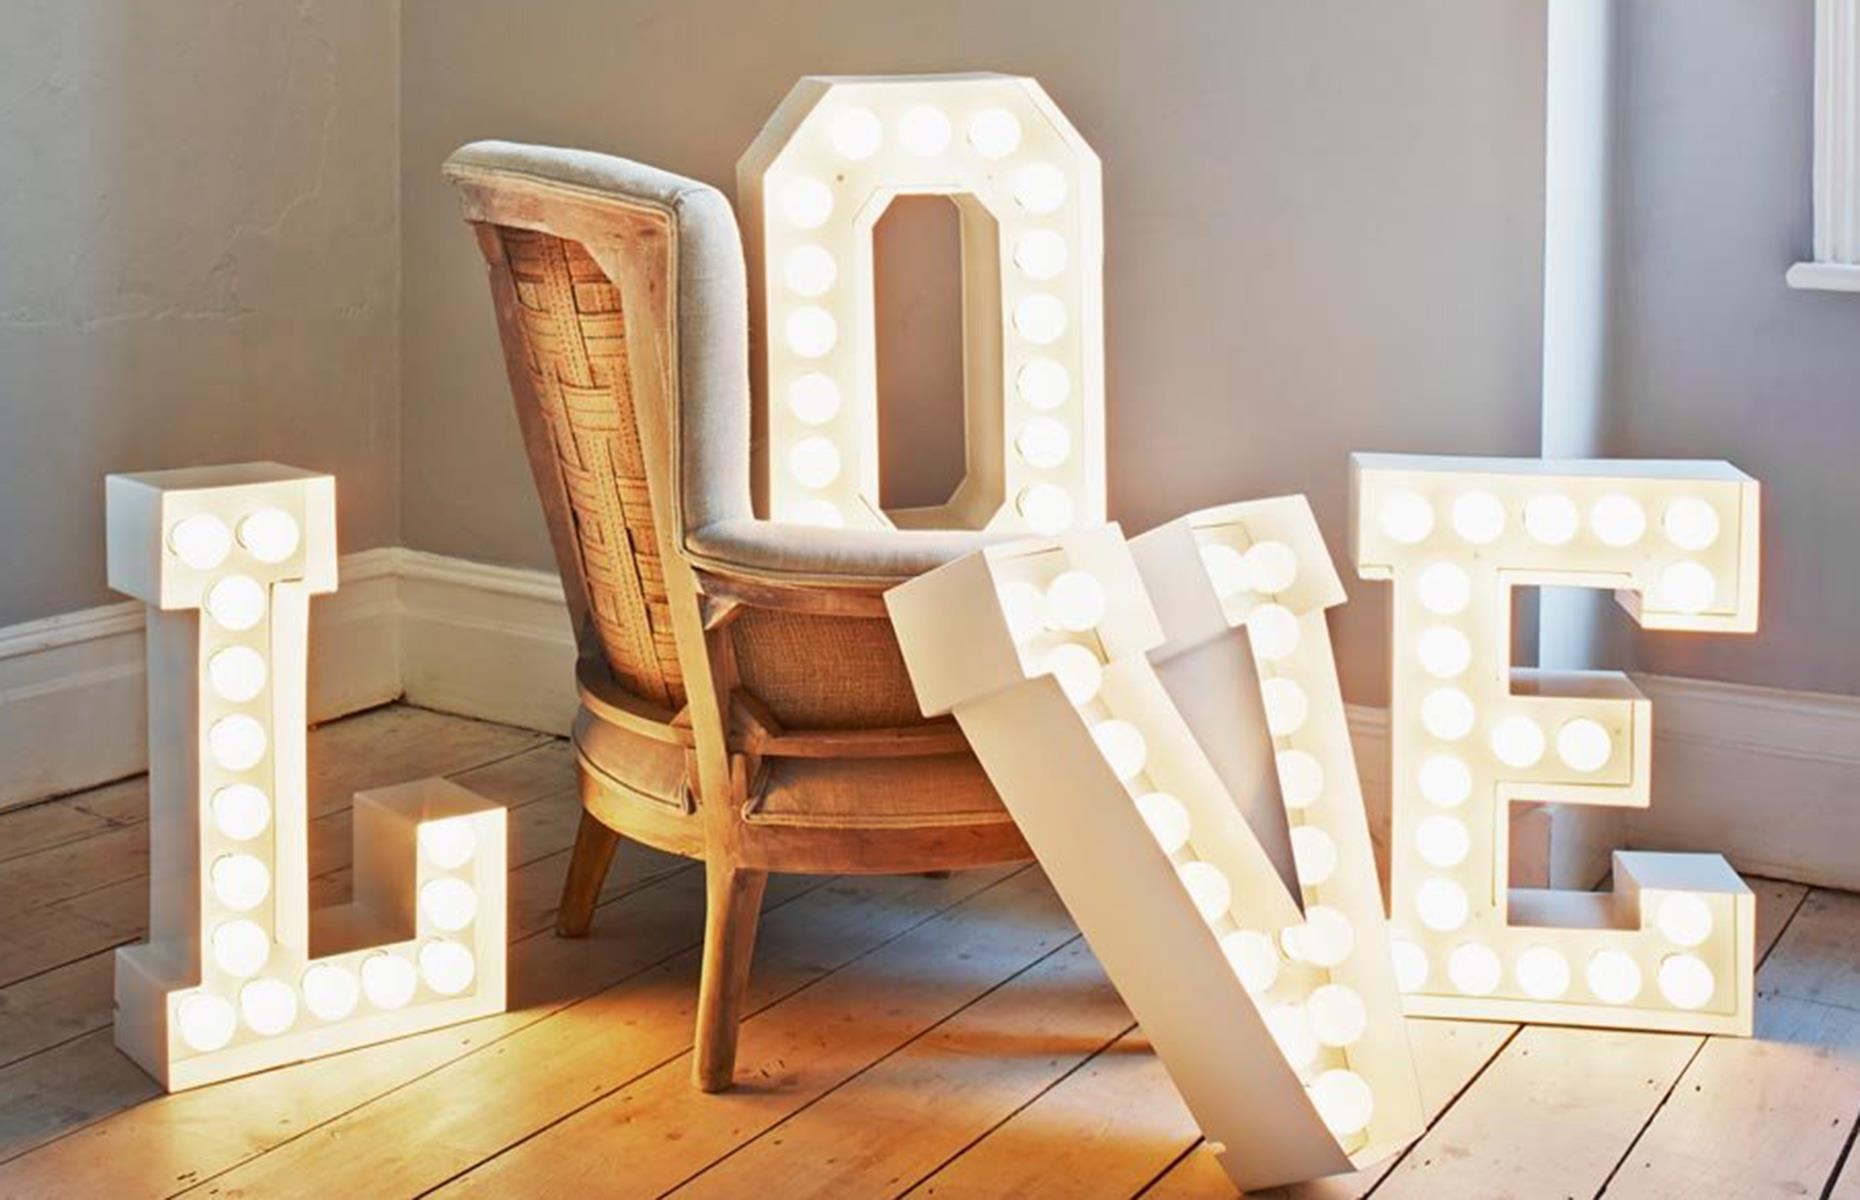 Display oversized light-up letters